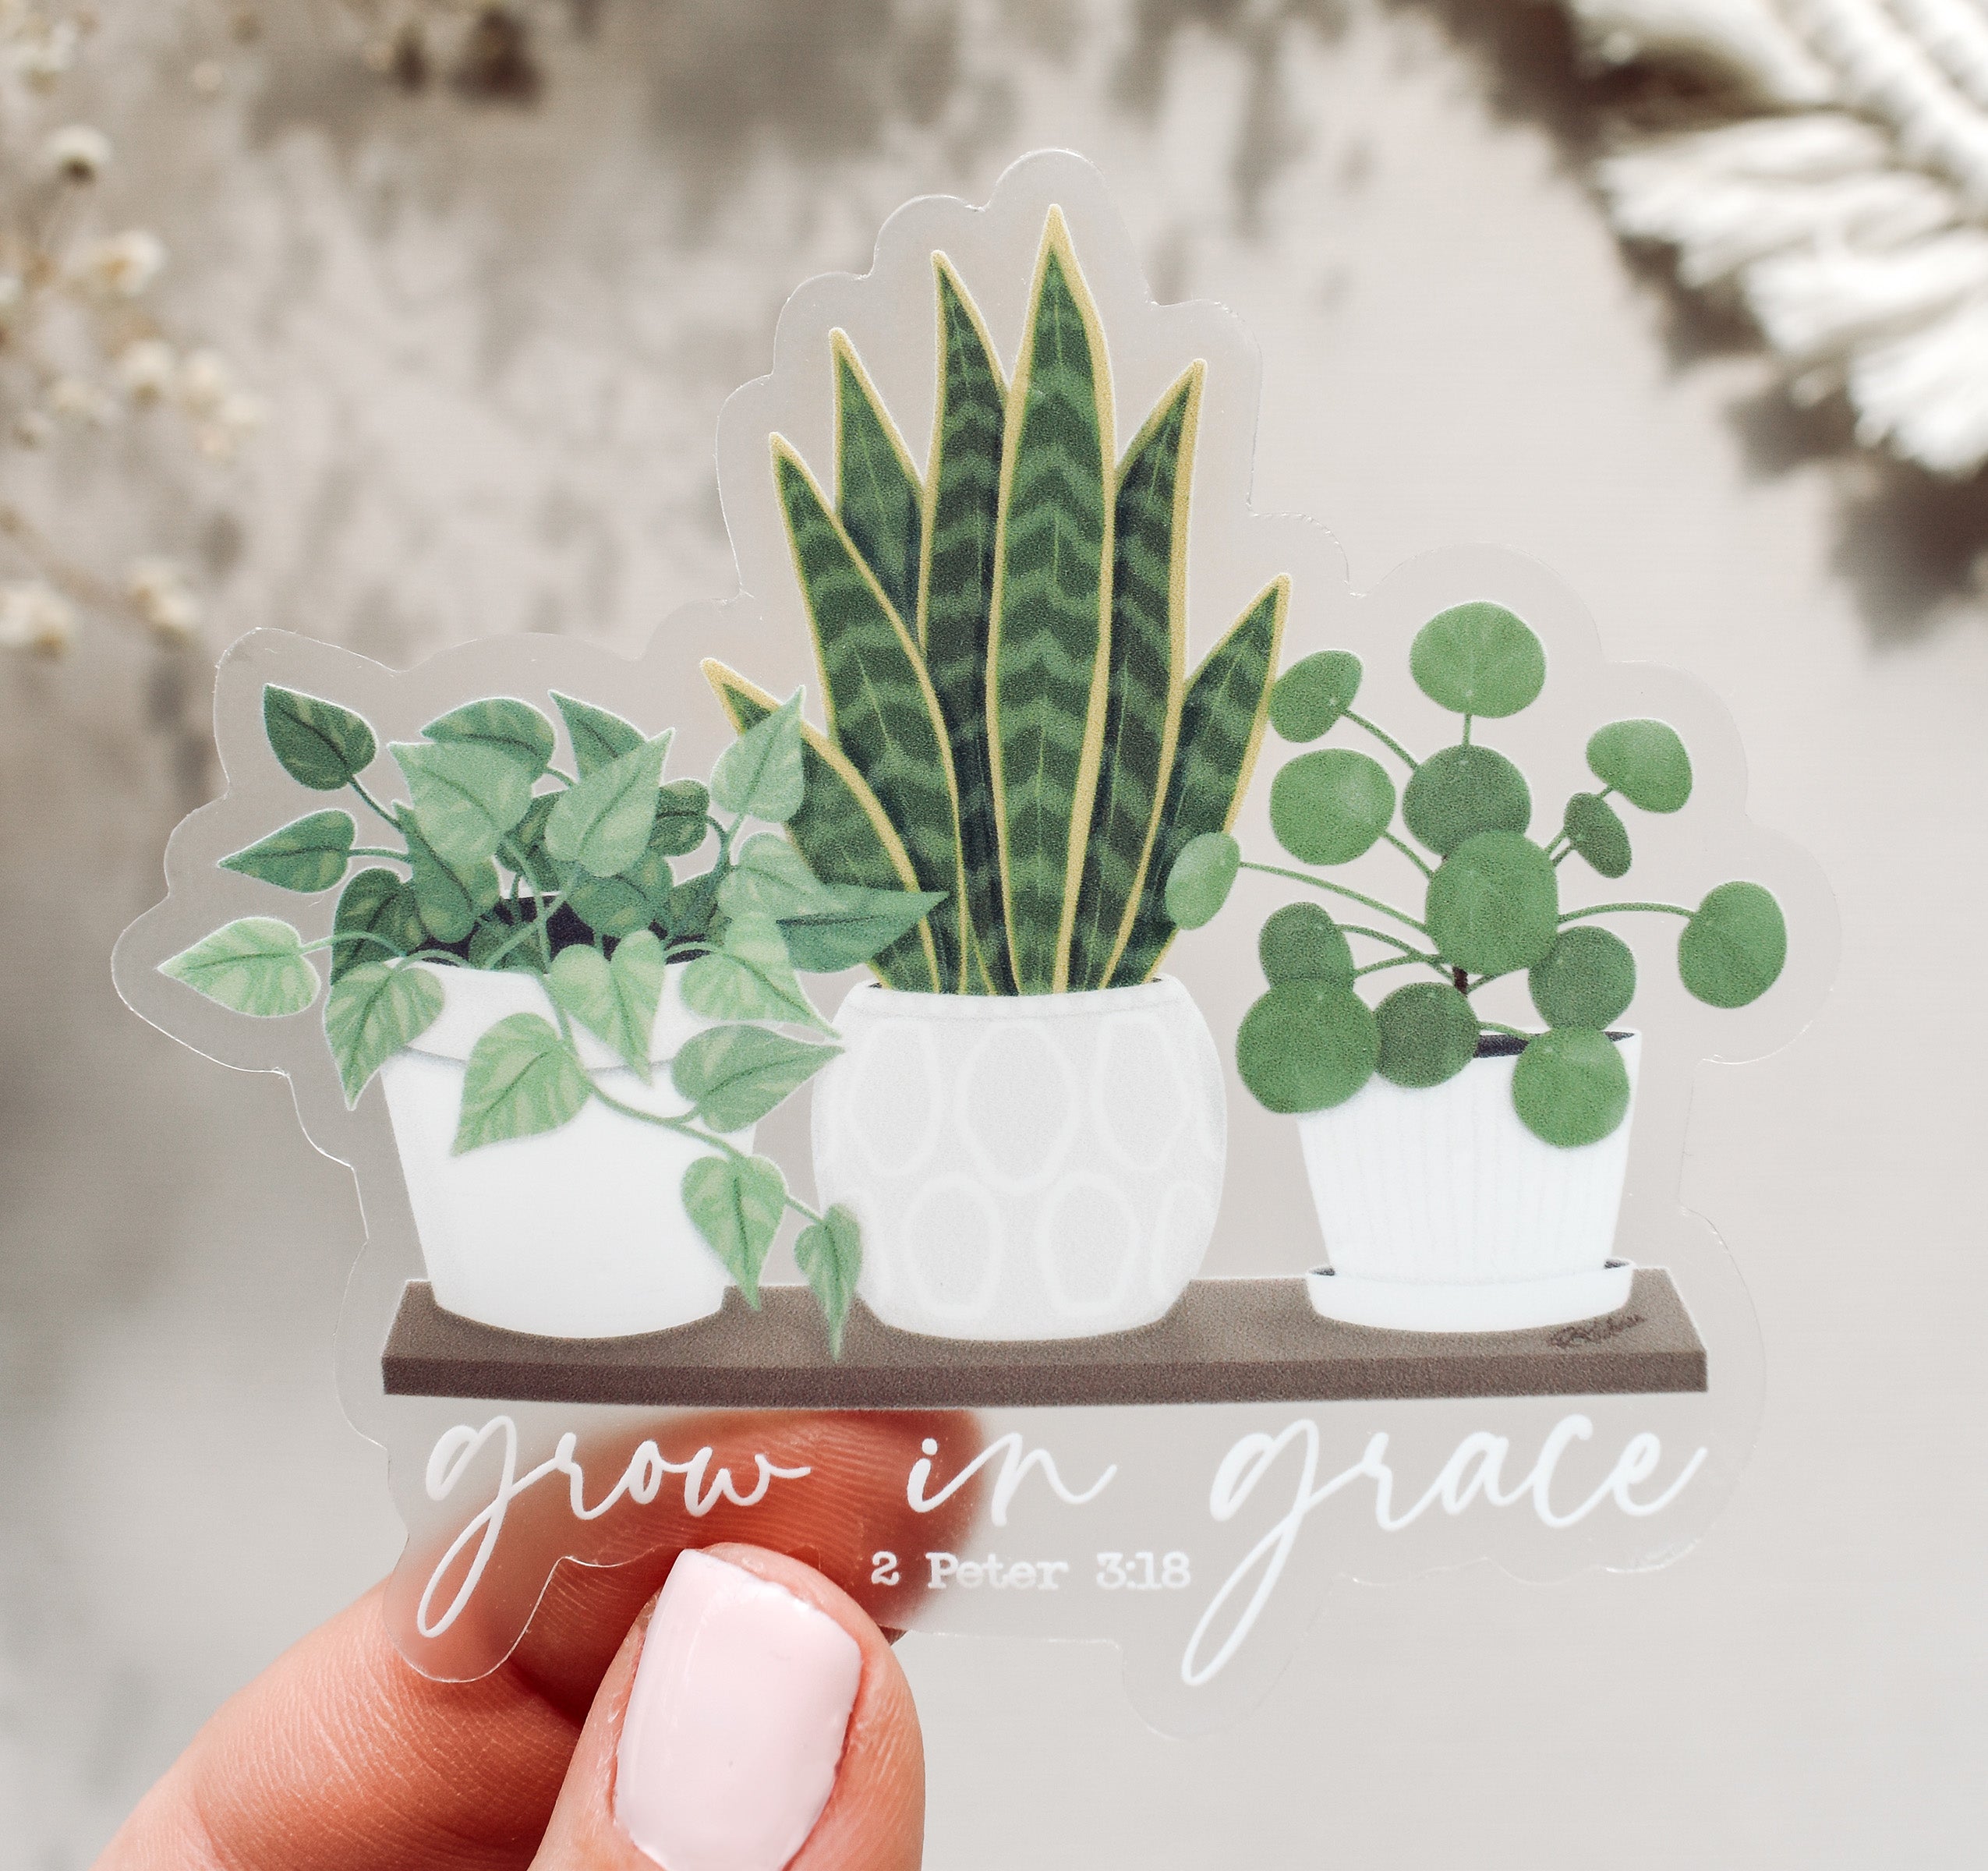 Grow in grace, 2 Peter 3:18 Bible verse Christian sticker with a shelf of houseplants. These plants include a pothos plant, snake plant, and pilea peperomioides